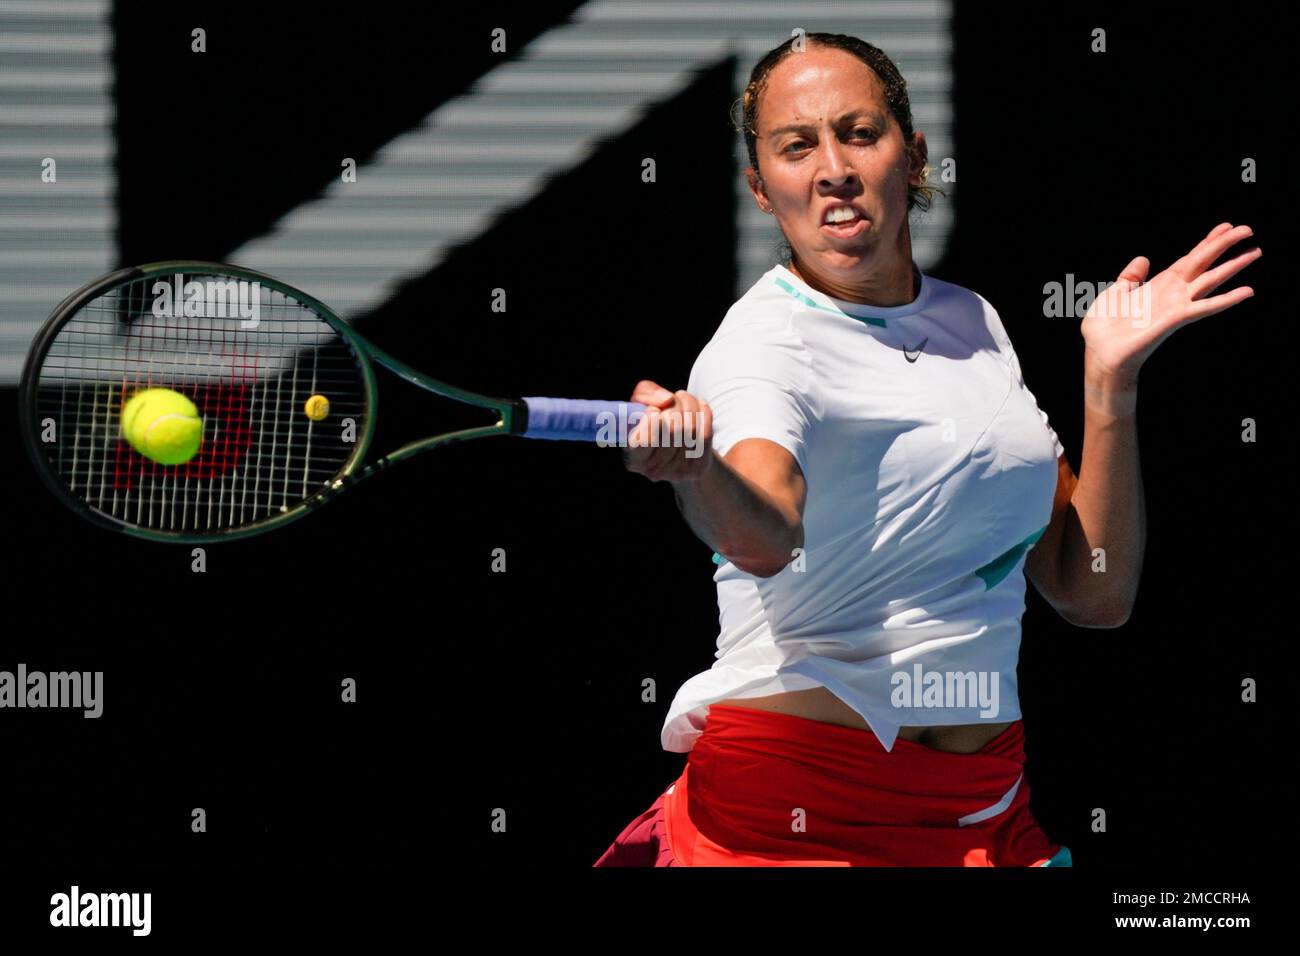 Madison Keys of the U.S. plays a forehand return to Paula Badosa of Spain during their fourth round match at the Australian Open tennis championships in Melbourne, Australia, Sunday, Jan. 23, 2022. (AP Photo/Simon Baker) Stock Photo